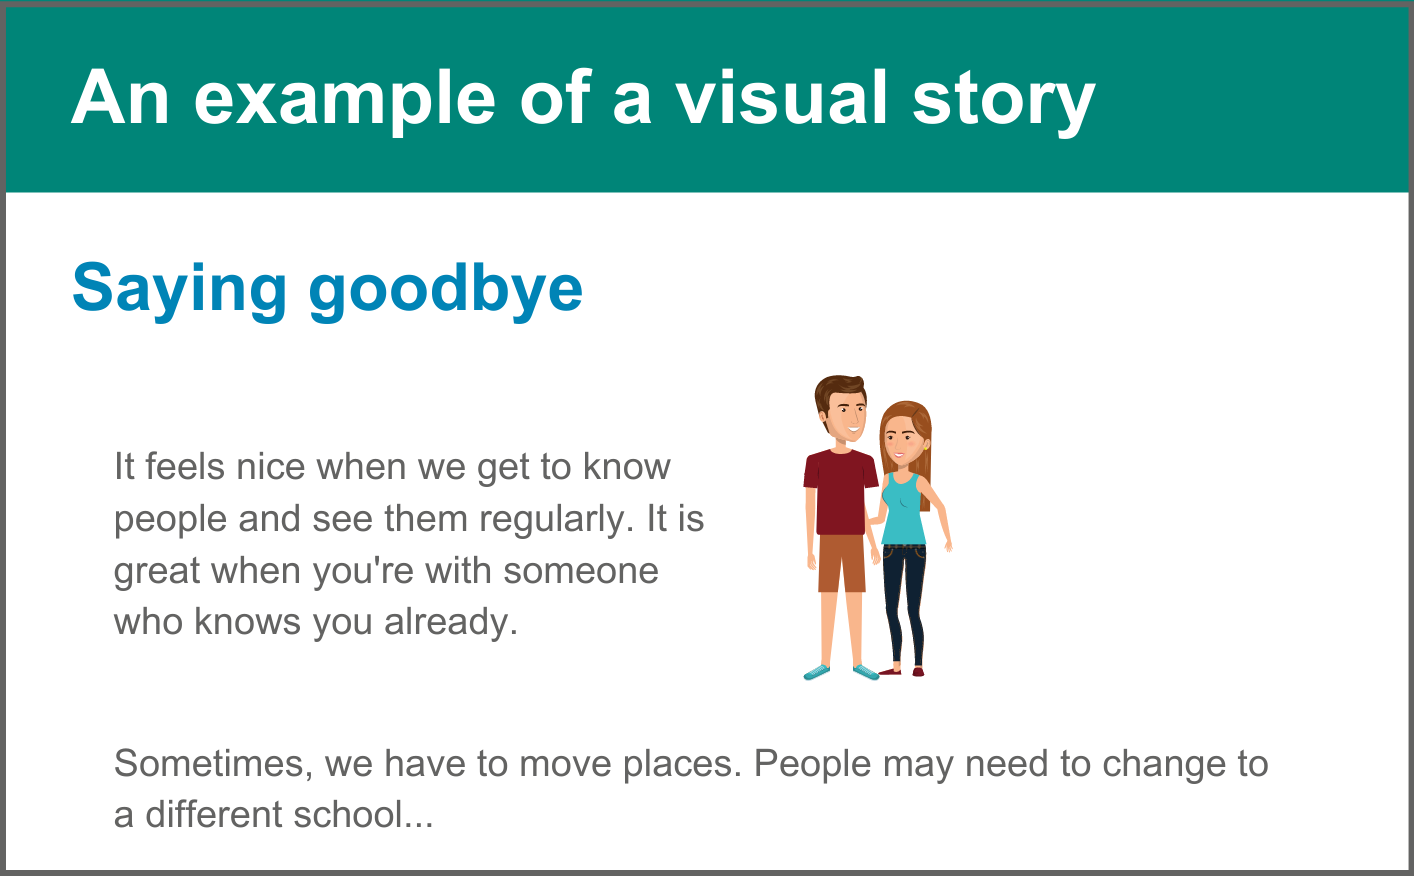 An example of a visual story